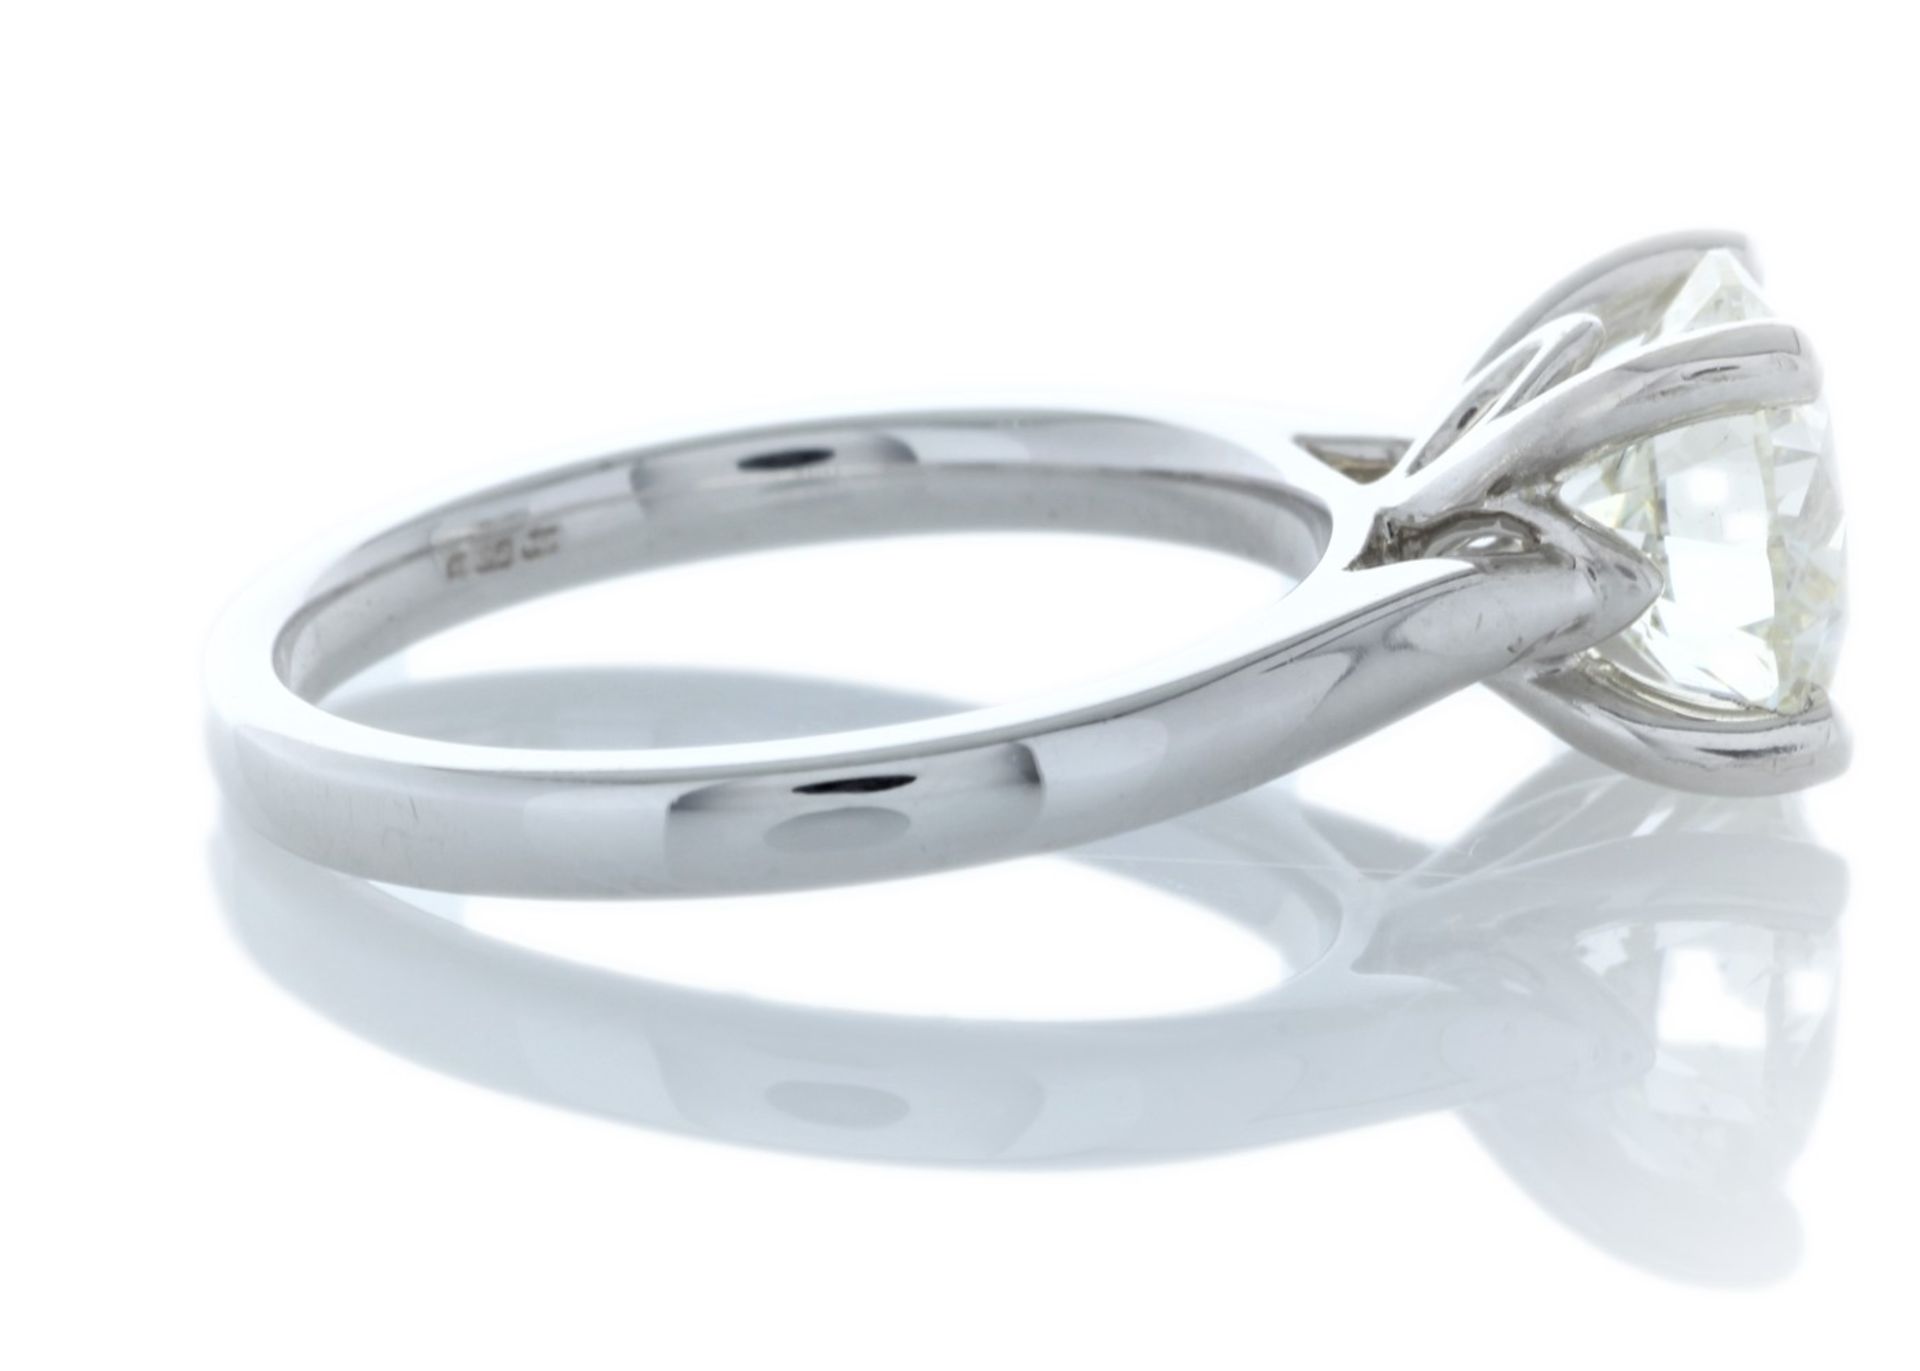 18ct White Gold Single Stone Claw Set Diamond Ring 2.05 Carats - Valued by GIE £79,750.00 - 18ct - Image 3 of 5